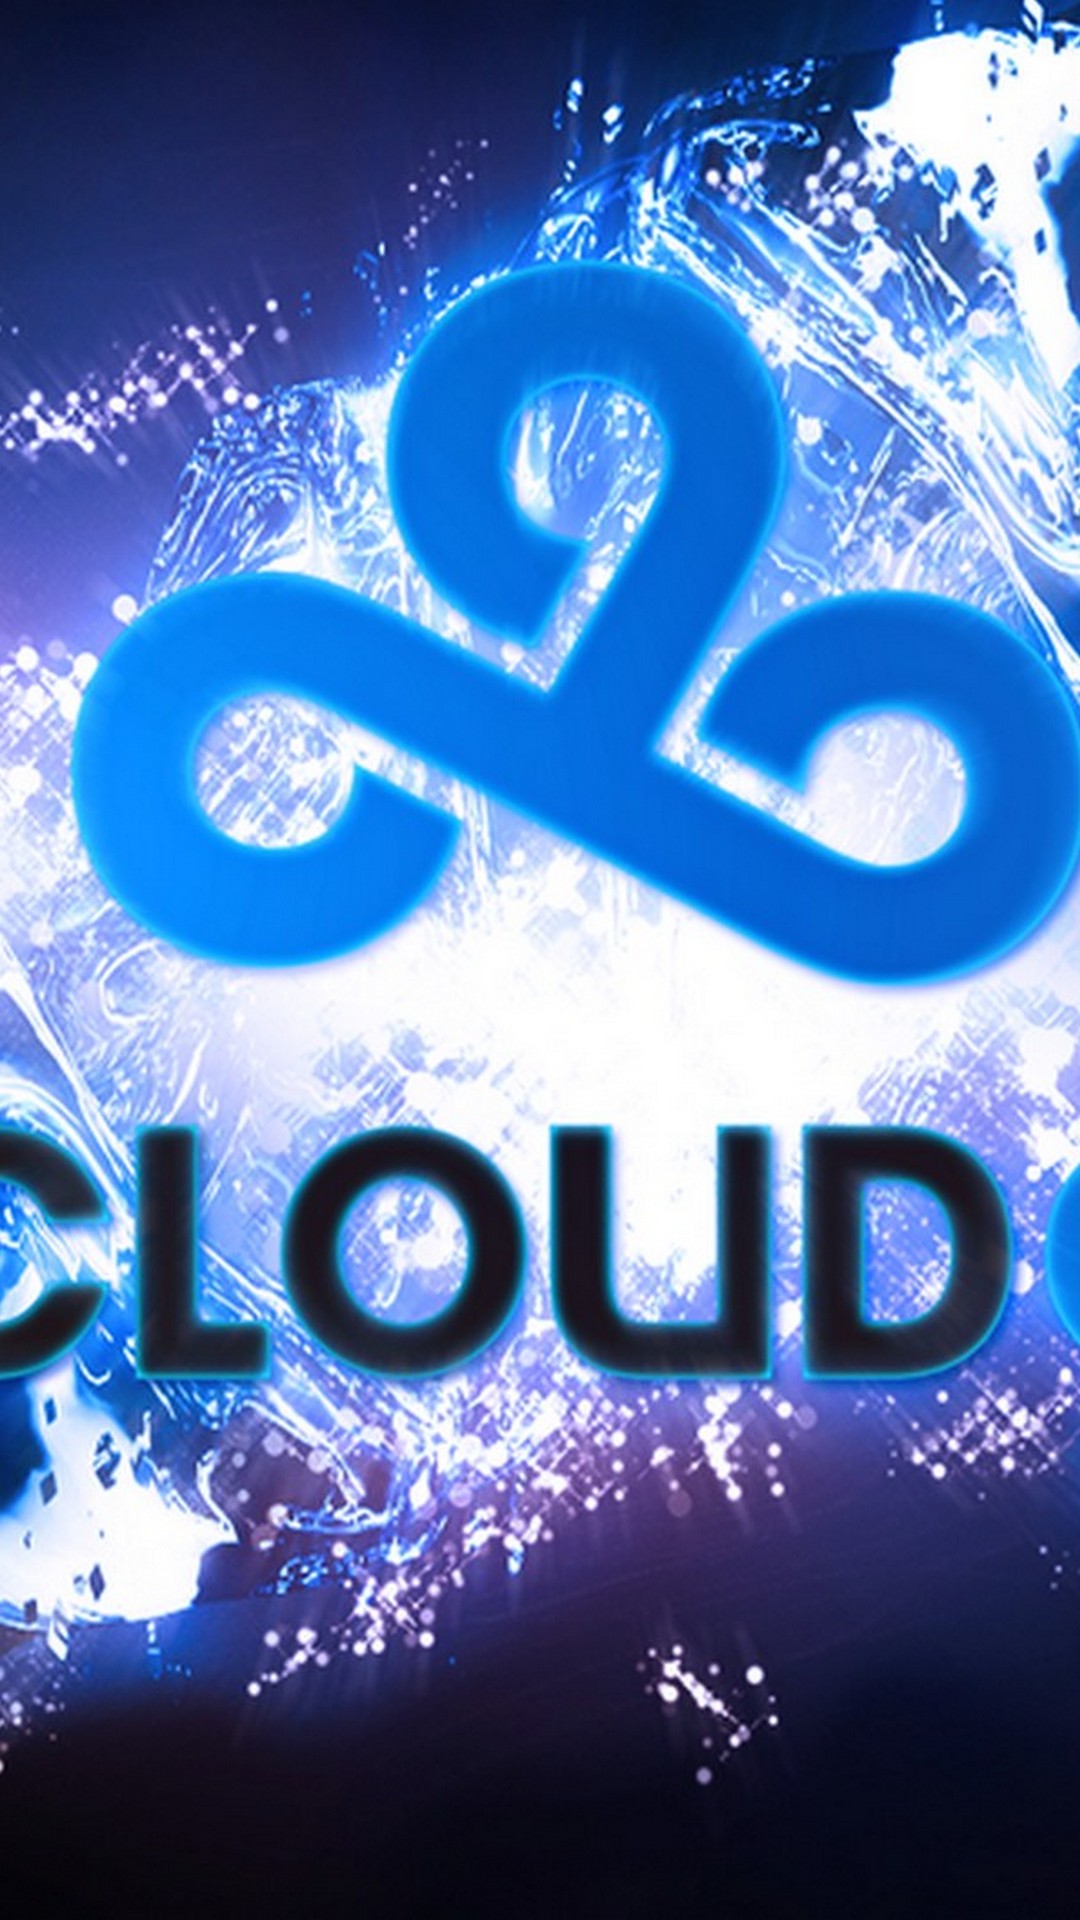 Cloud 9 Backgrounds For Android with HD resolution 1080x1920